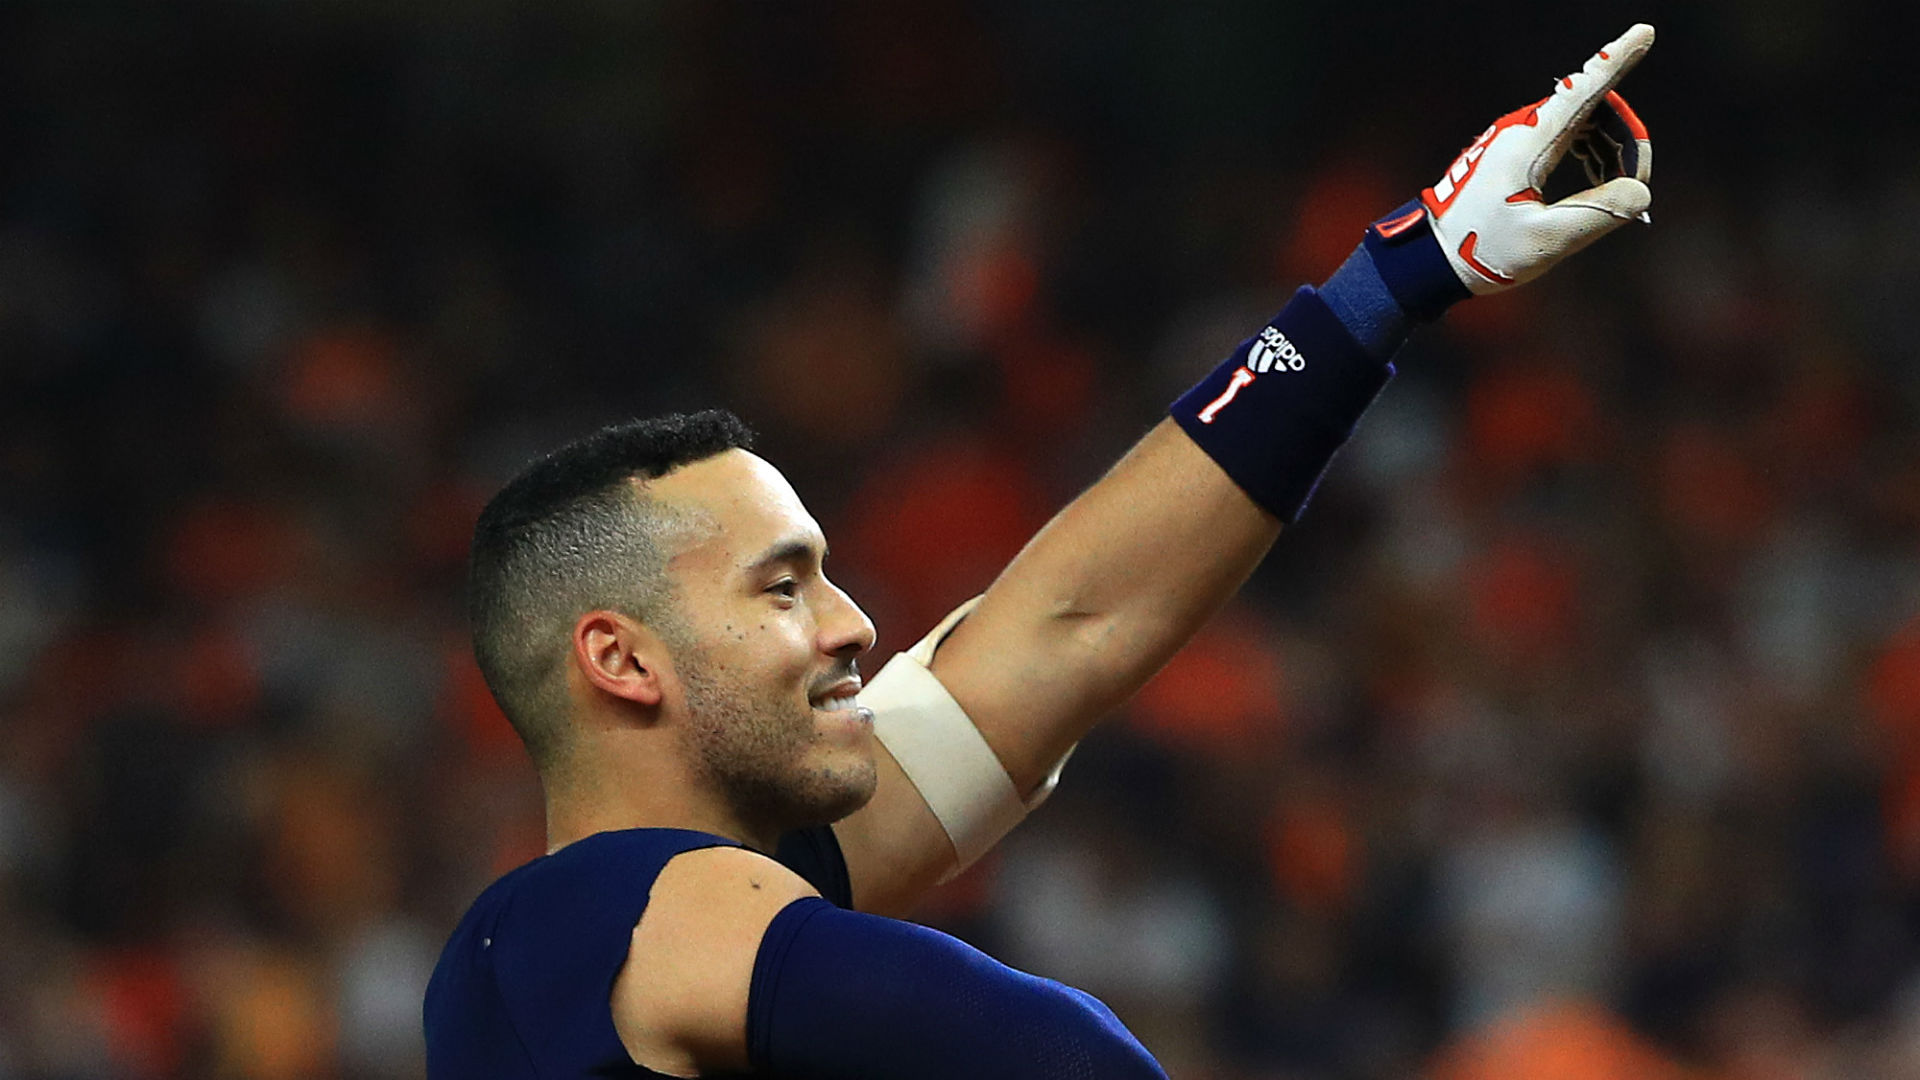 It took extra innings for the Astros to come out on top in this thriller and the series is shaping up to be an exciting one.